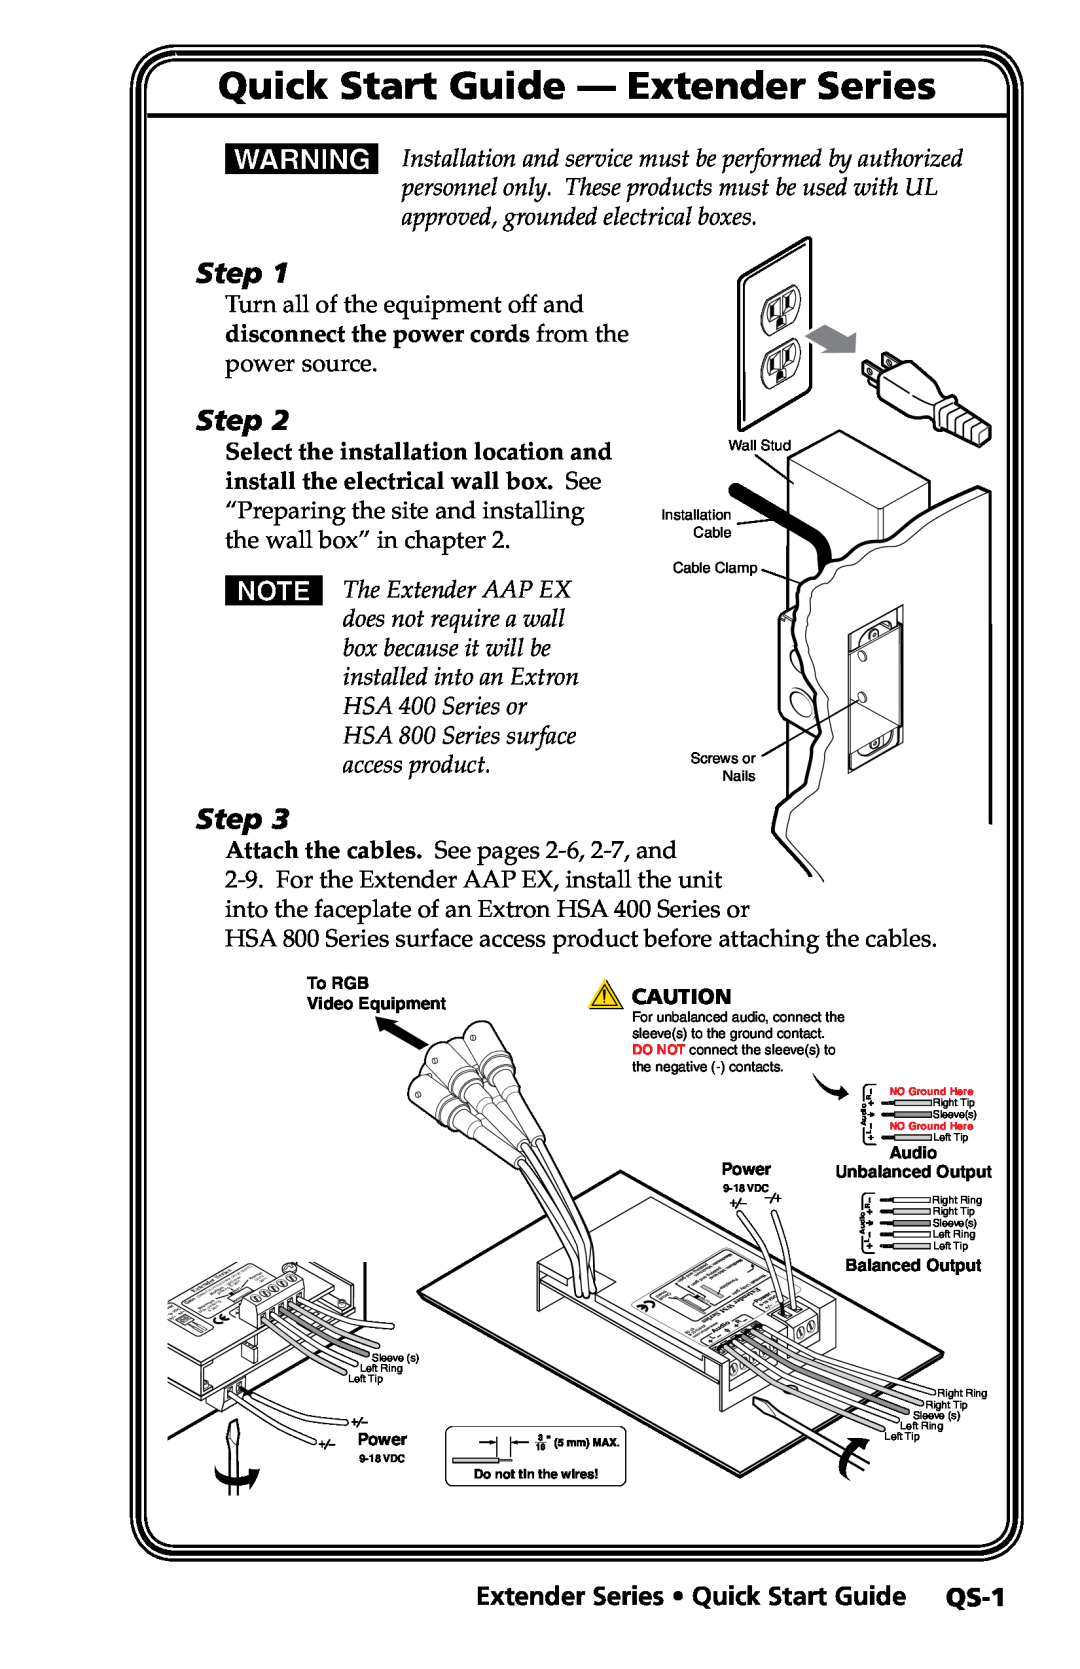 Extron electronic manual Quick Start Guide - Extender Series, Step, Extender Series Quick Start Guide QS-1 